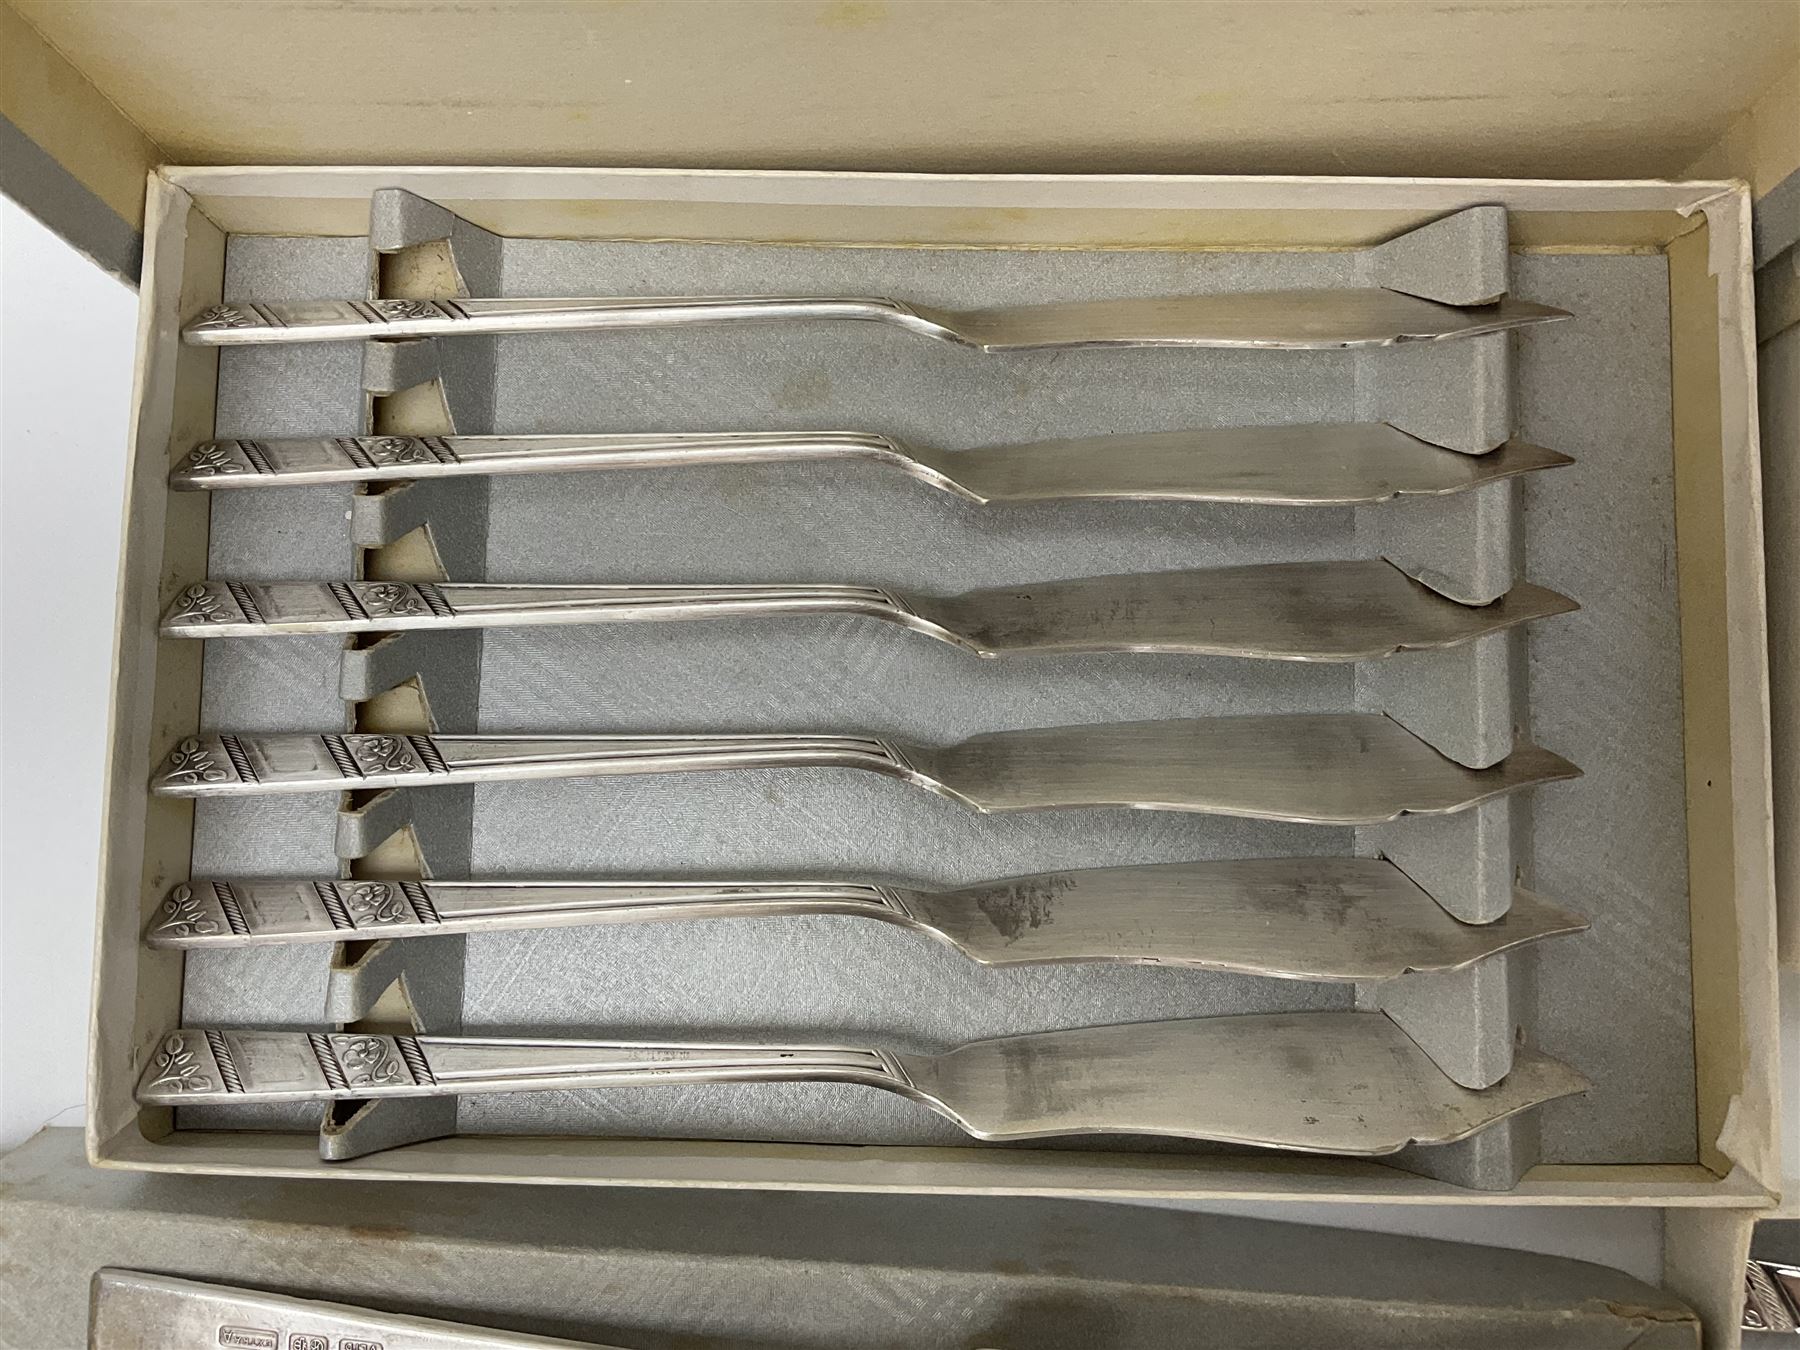 Viners Ltd silver plate Silver Rose pattern cutlery service for six place settings - Image 10 of 11